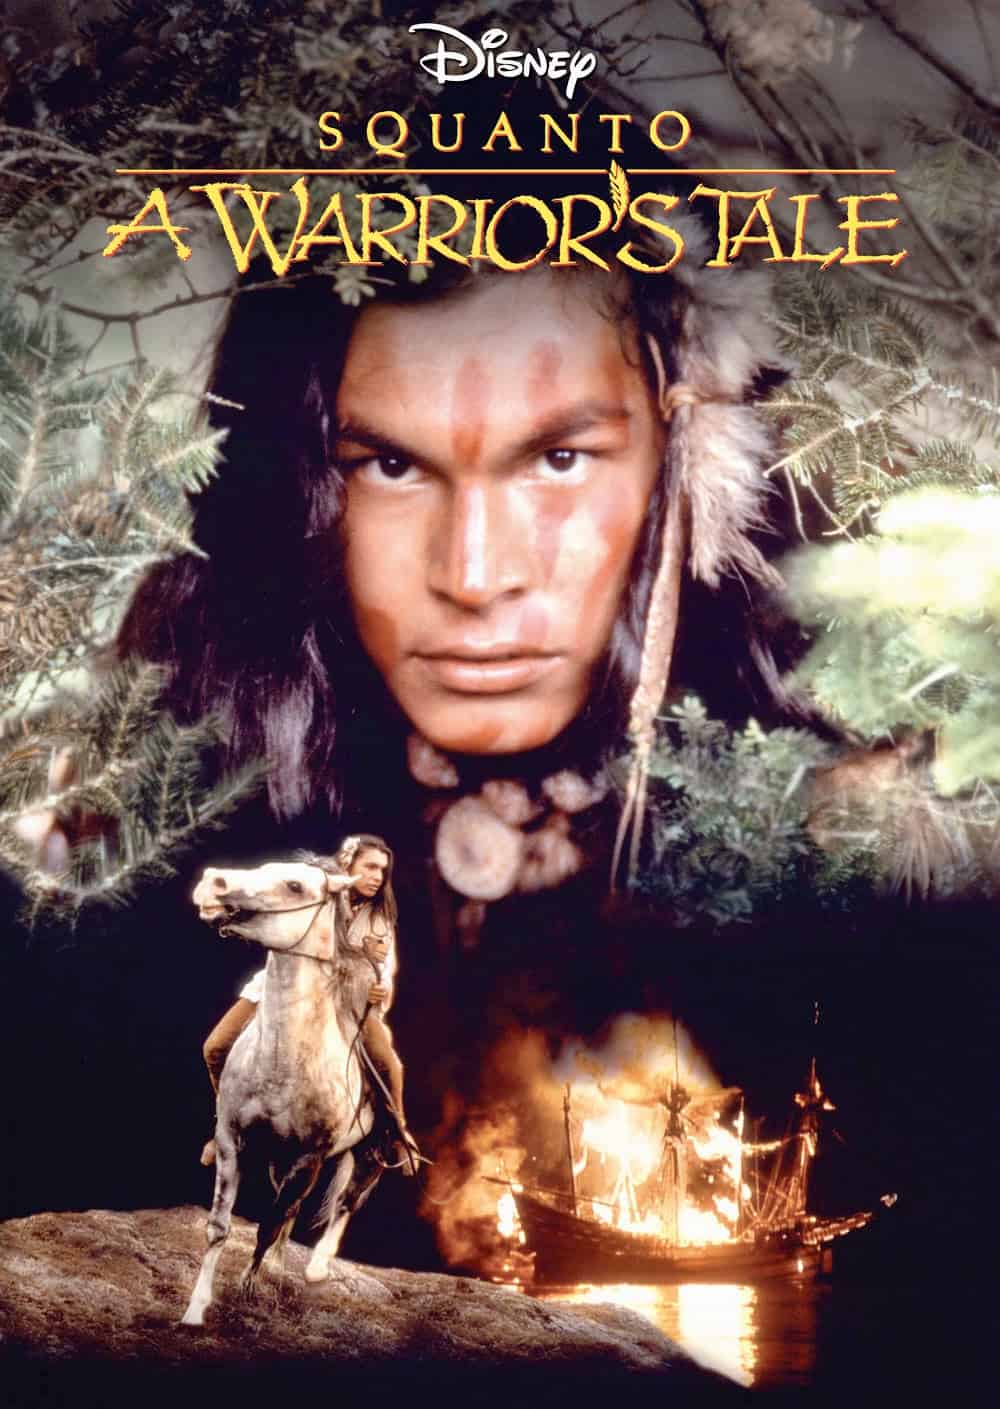 Disney's Squanto A Warriors Tale Movie versus the Real Life Squanto